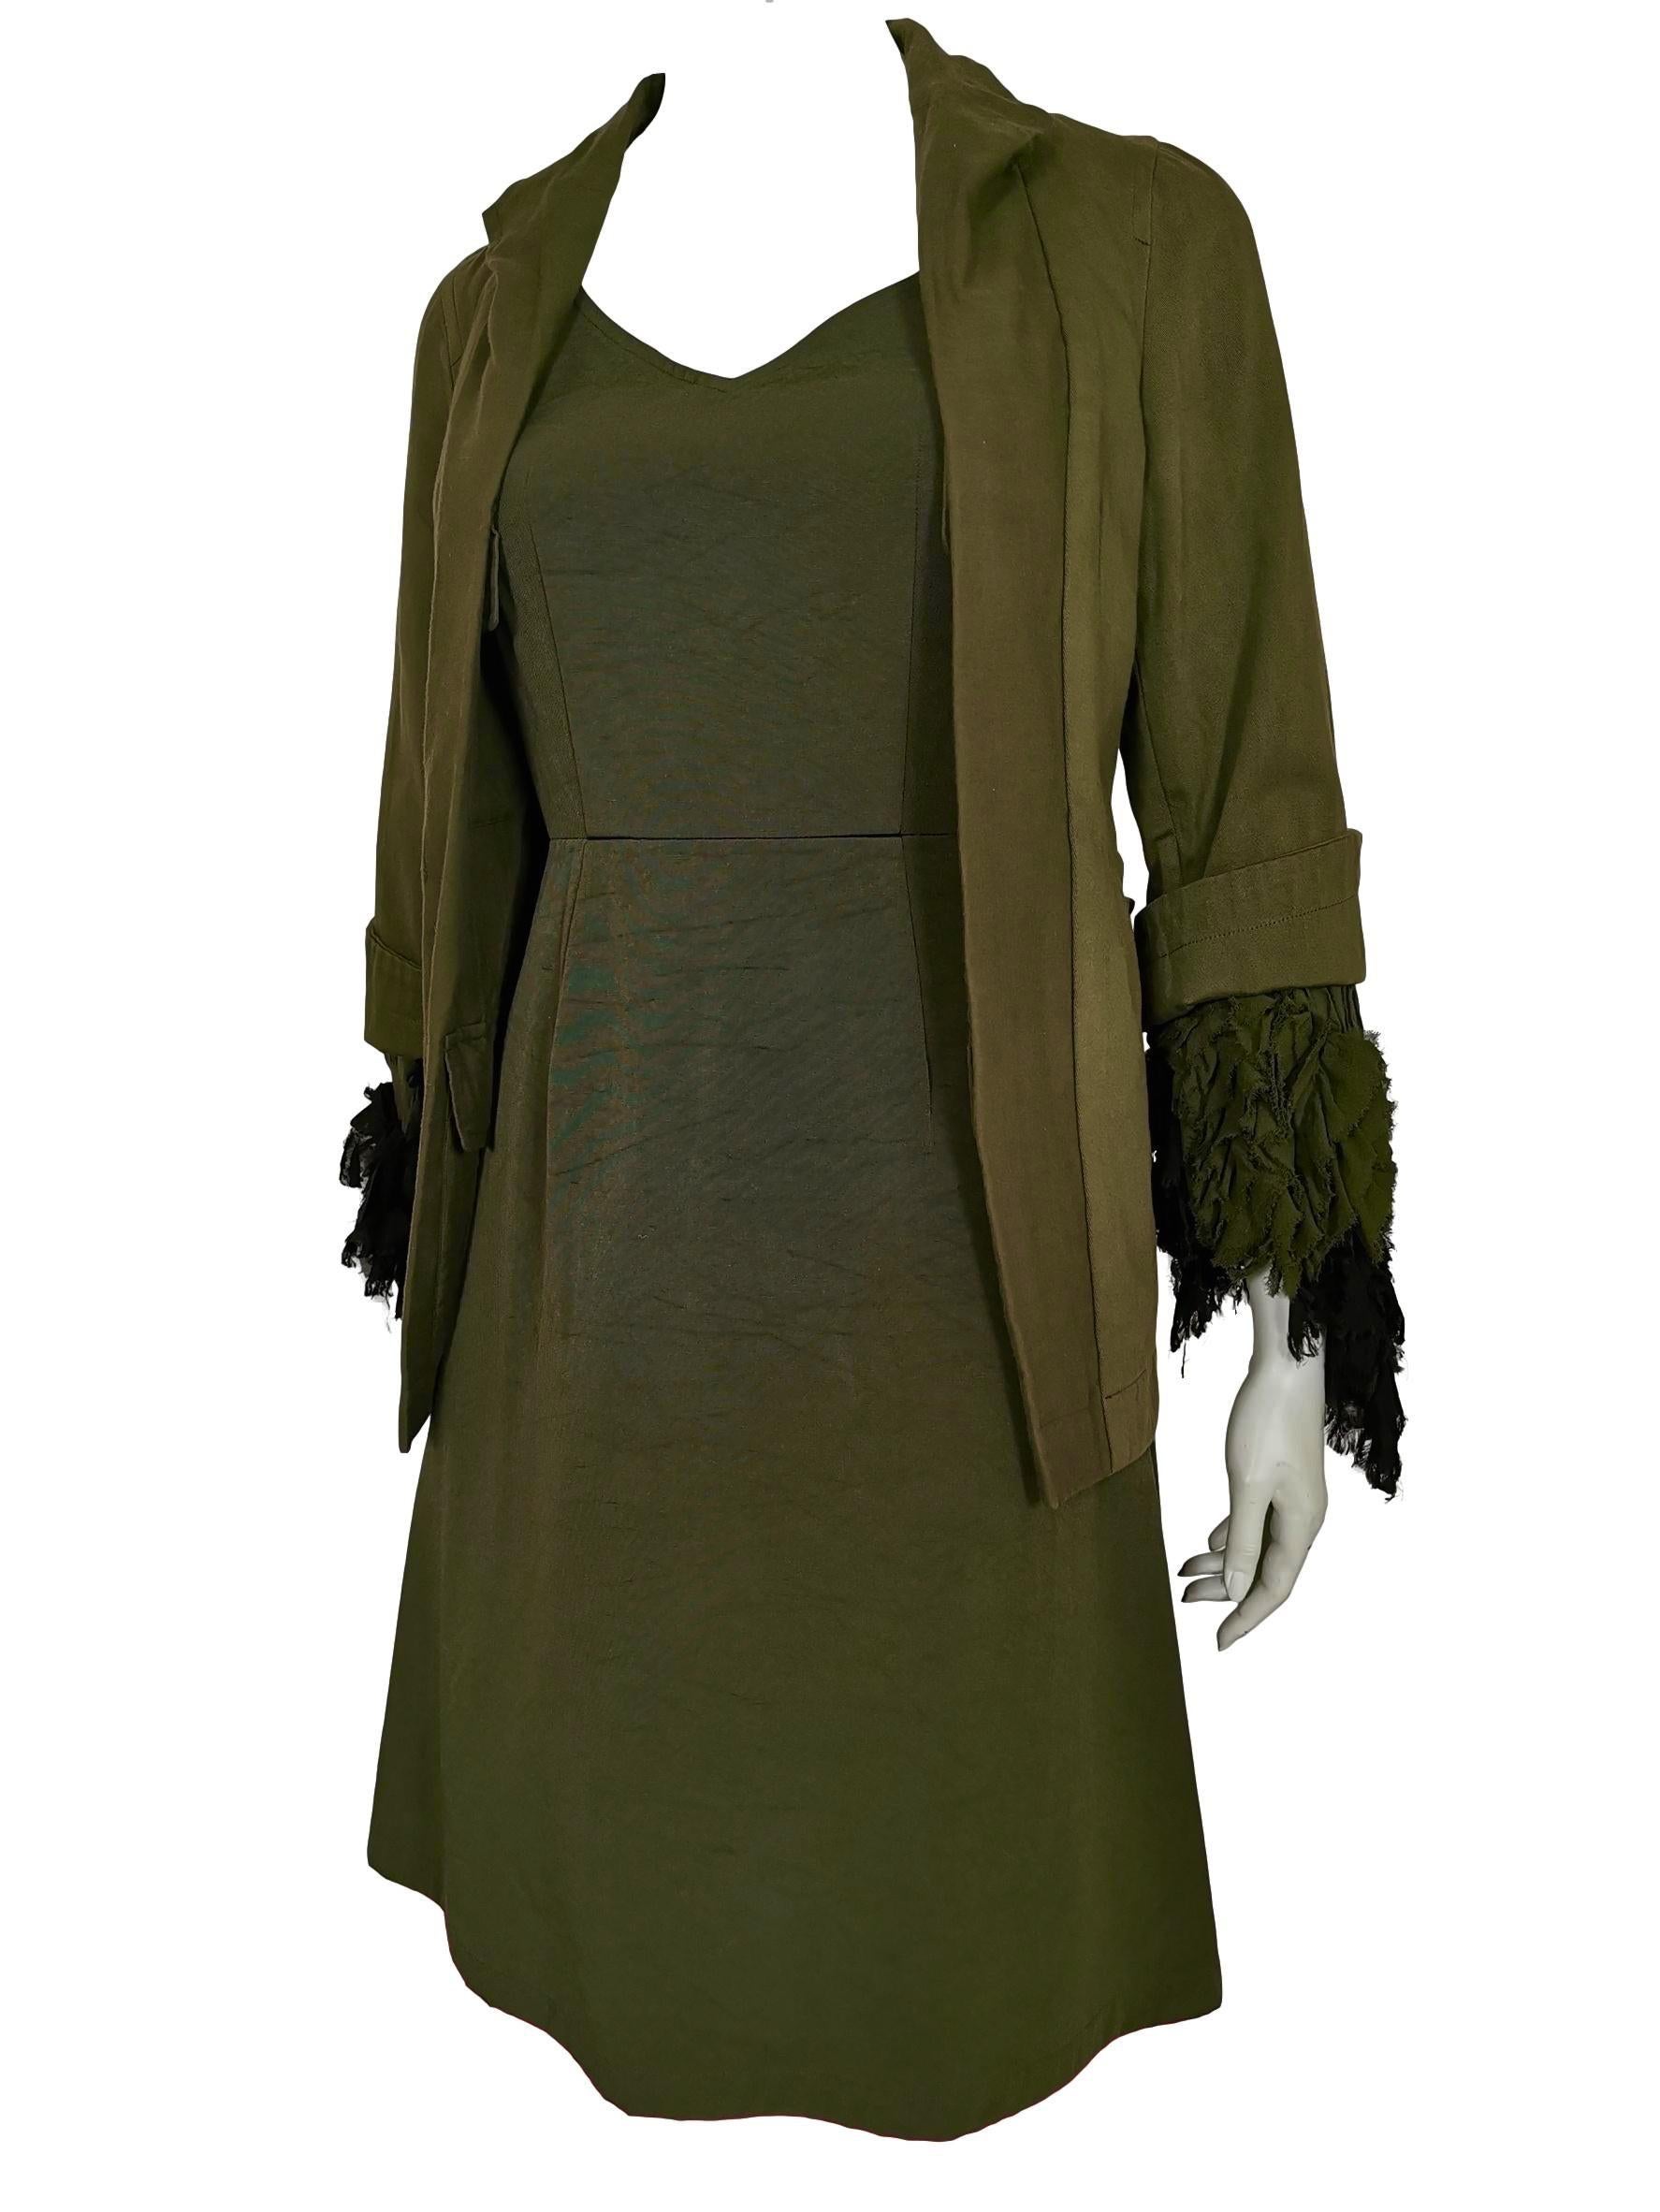 Comme des Garcons Army Green Dress AD 1999 For Sale 4